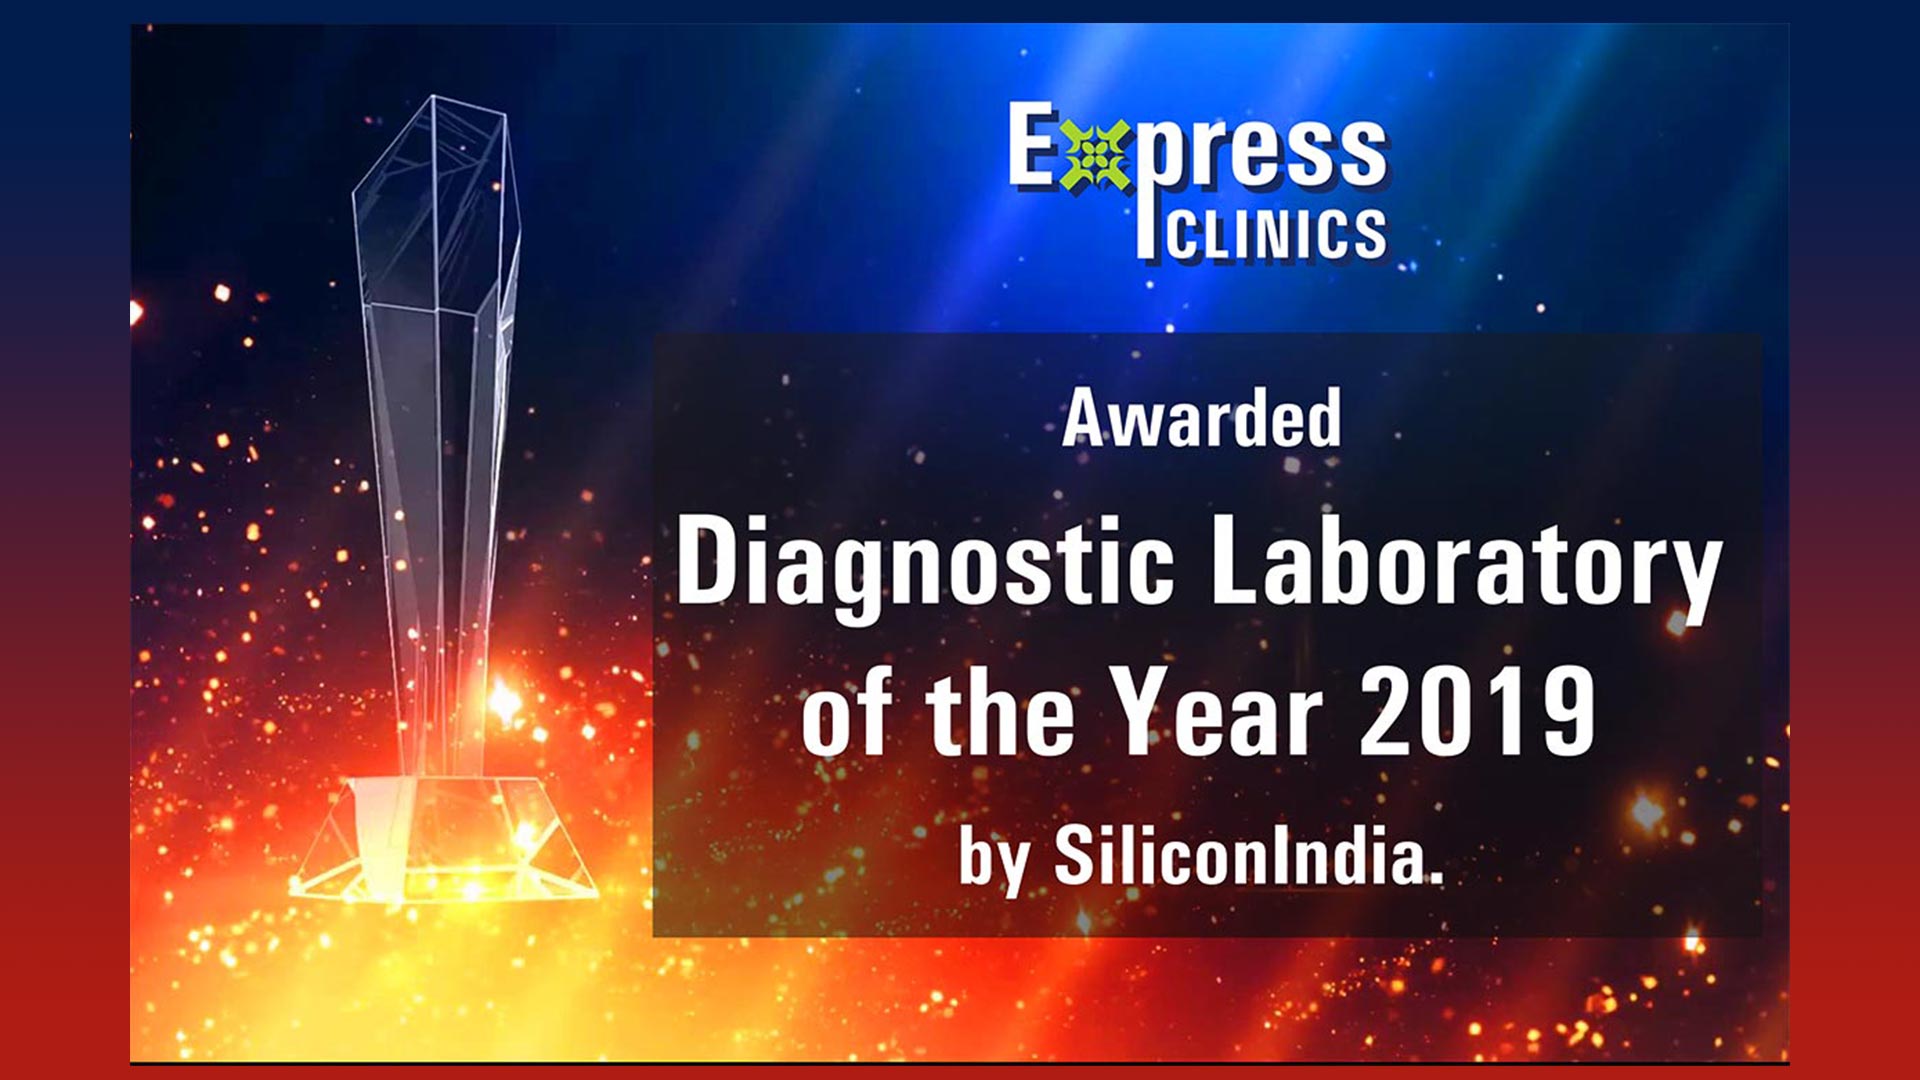 Diagnostic Laboratory of the Year 2019